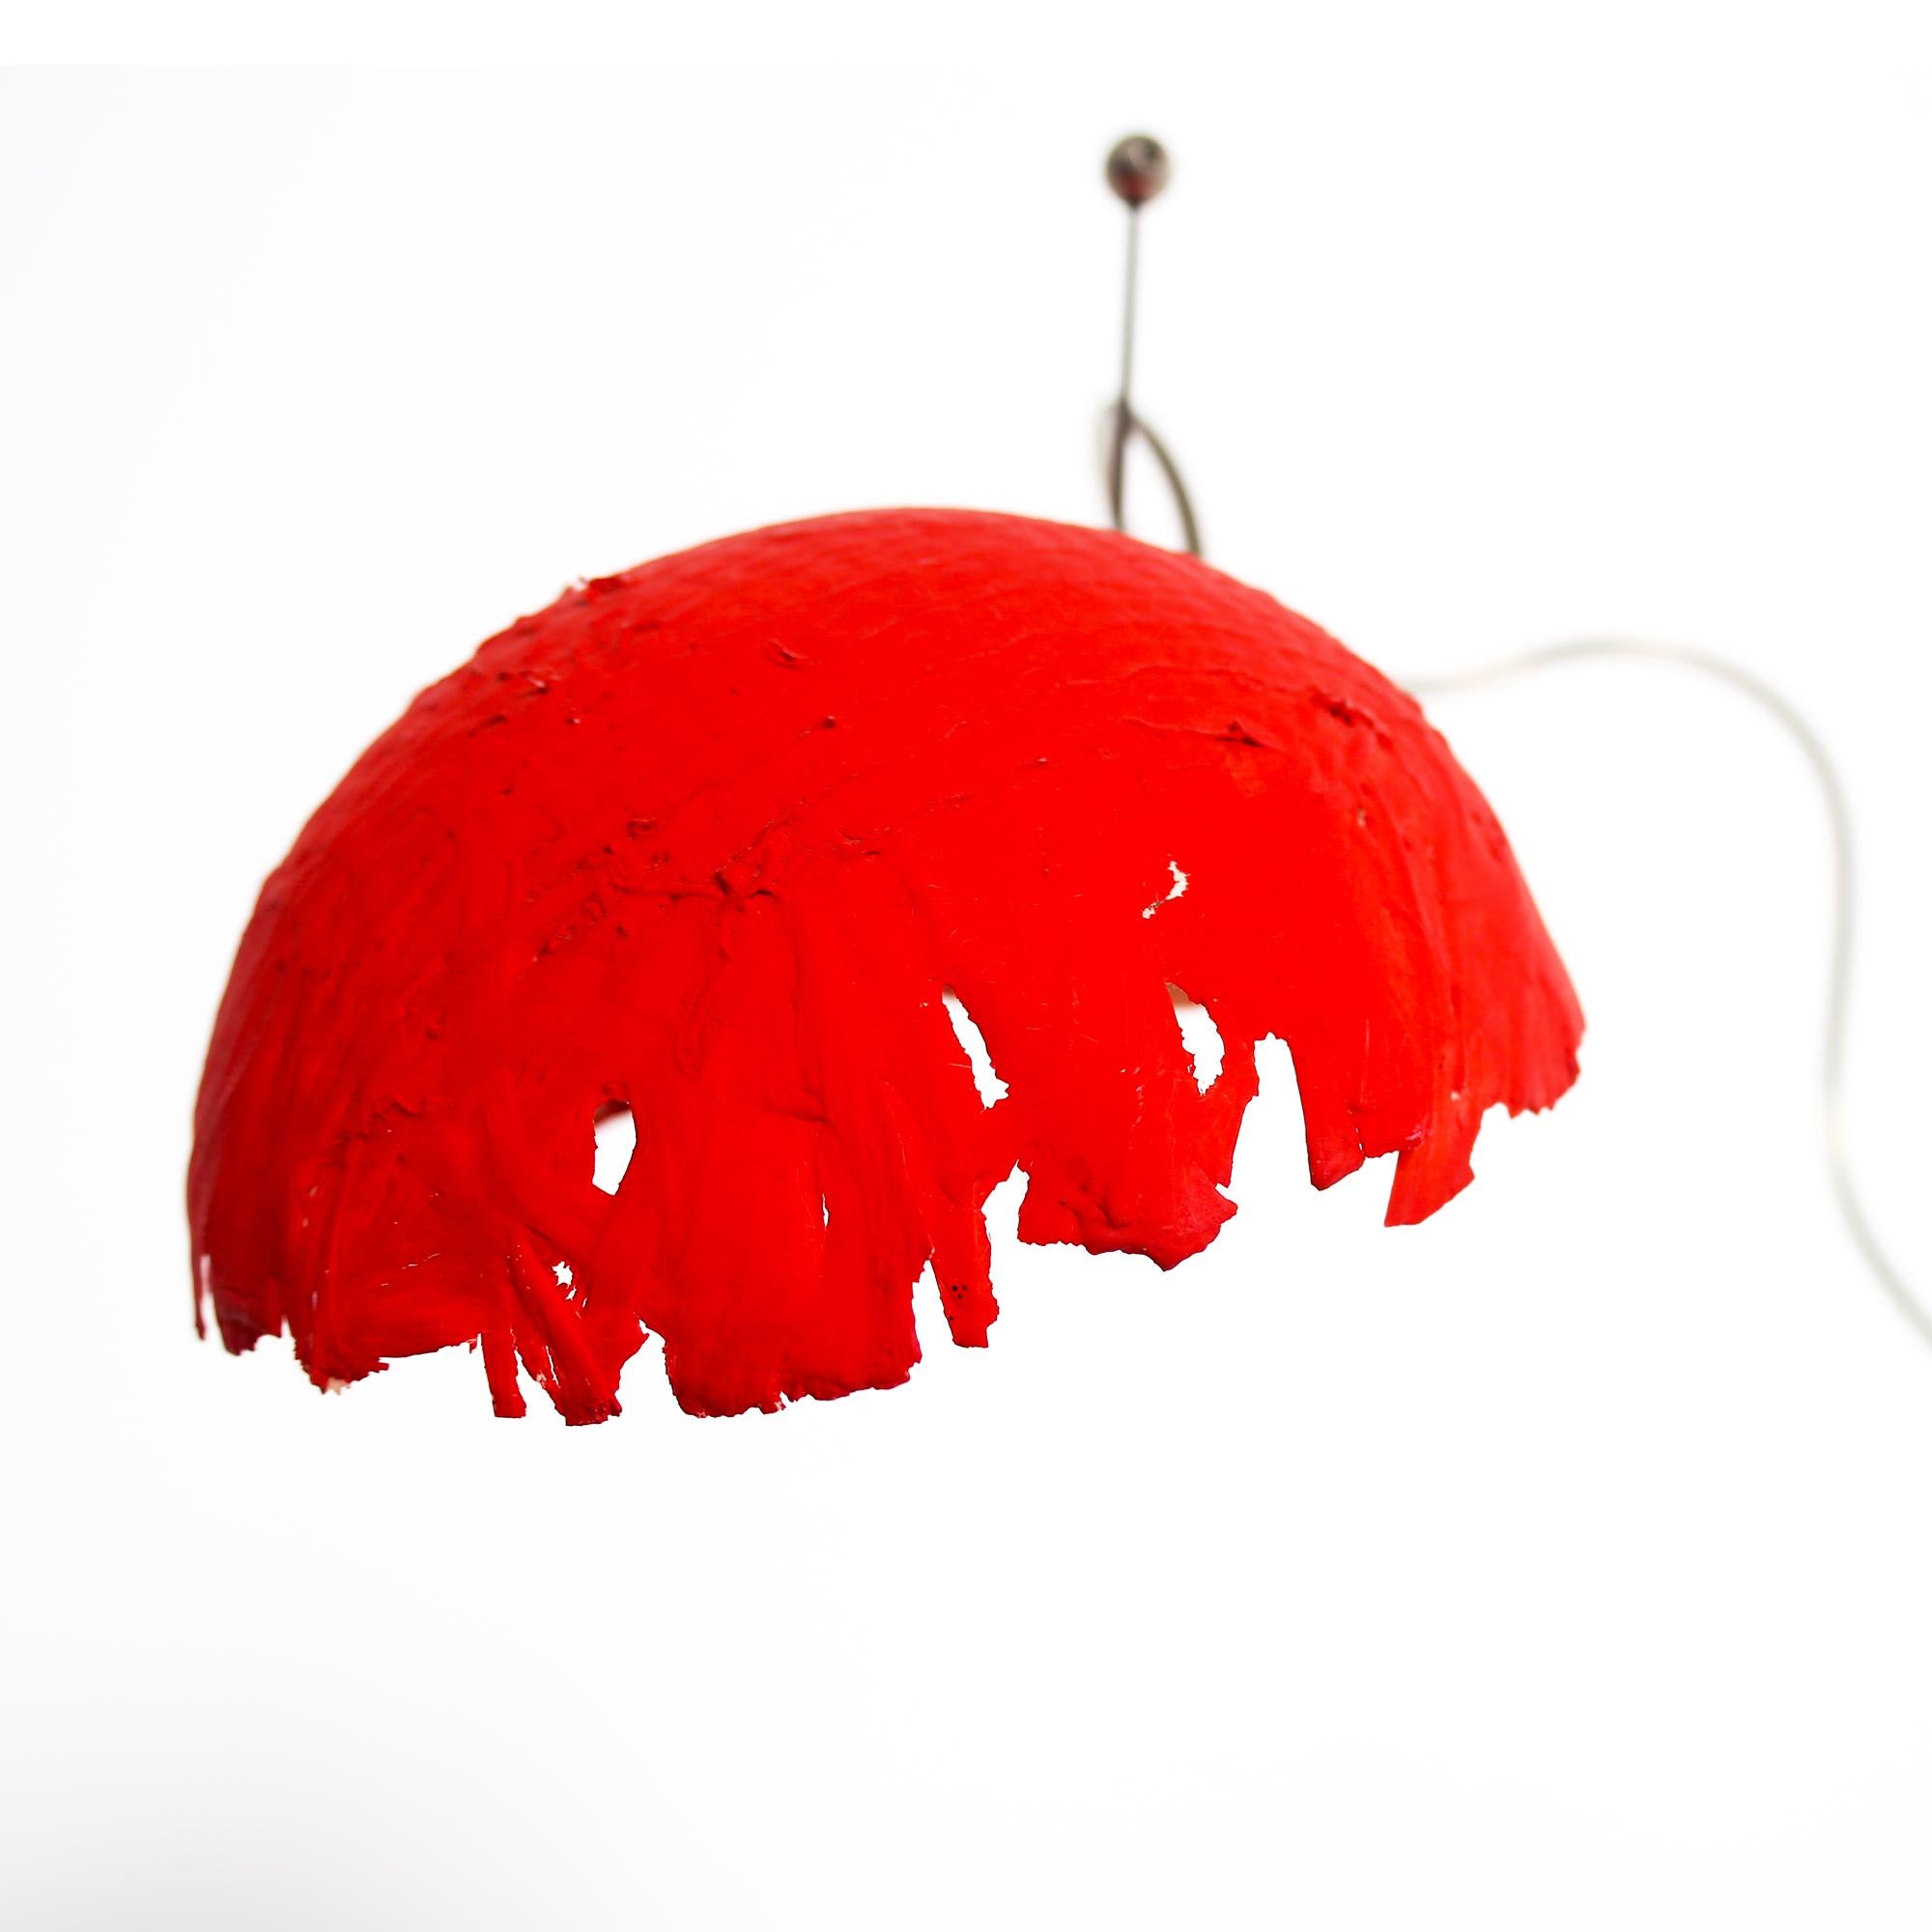 Contemporary Italian Modern Catellani&Smith Red Table Lamp, 2004 For Sale